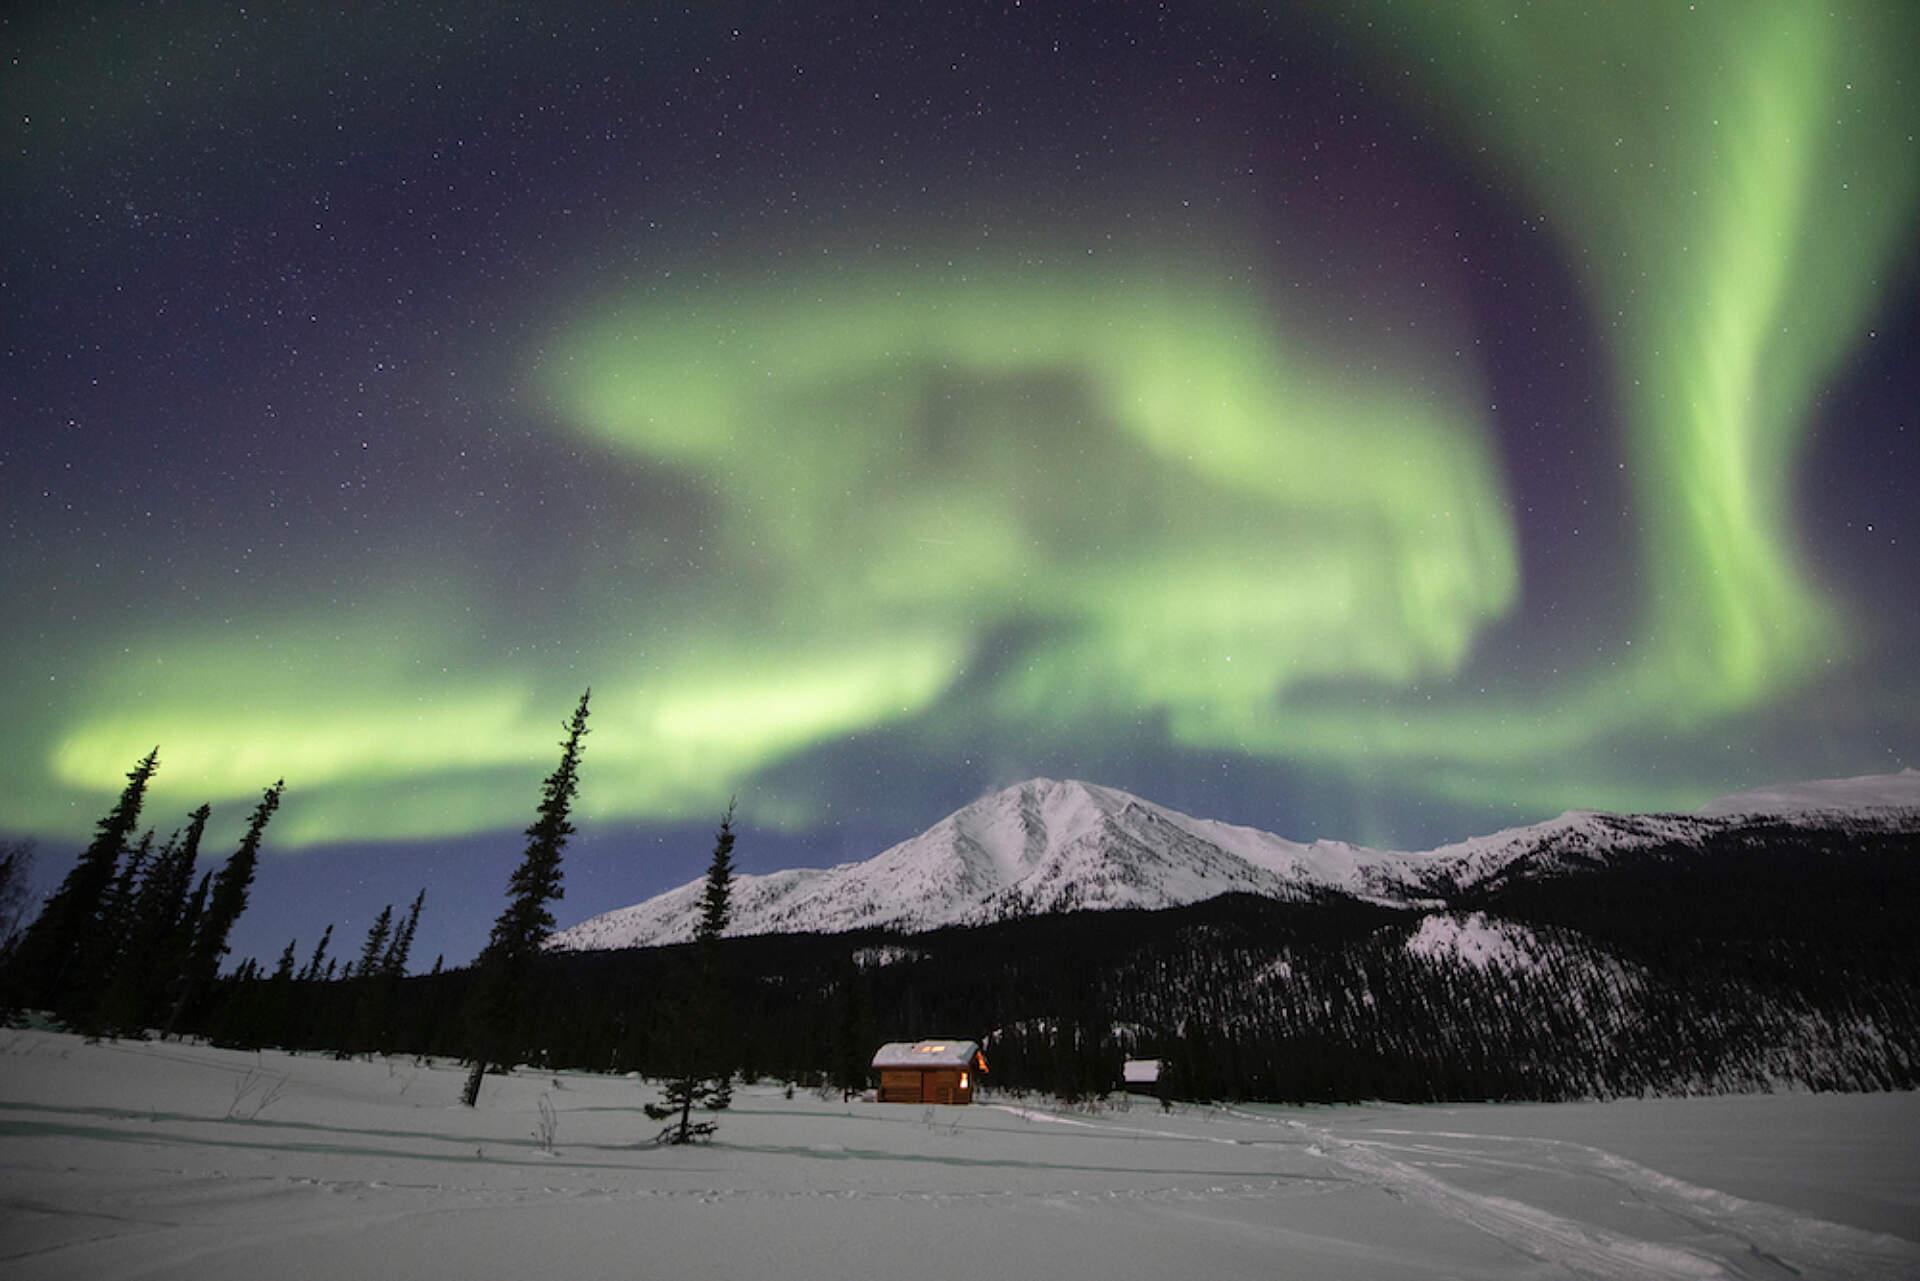 View of the green northern lights in a dancing ribbon over Iniakuk Lake Wilderness Lodge